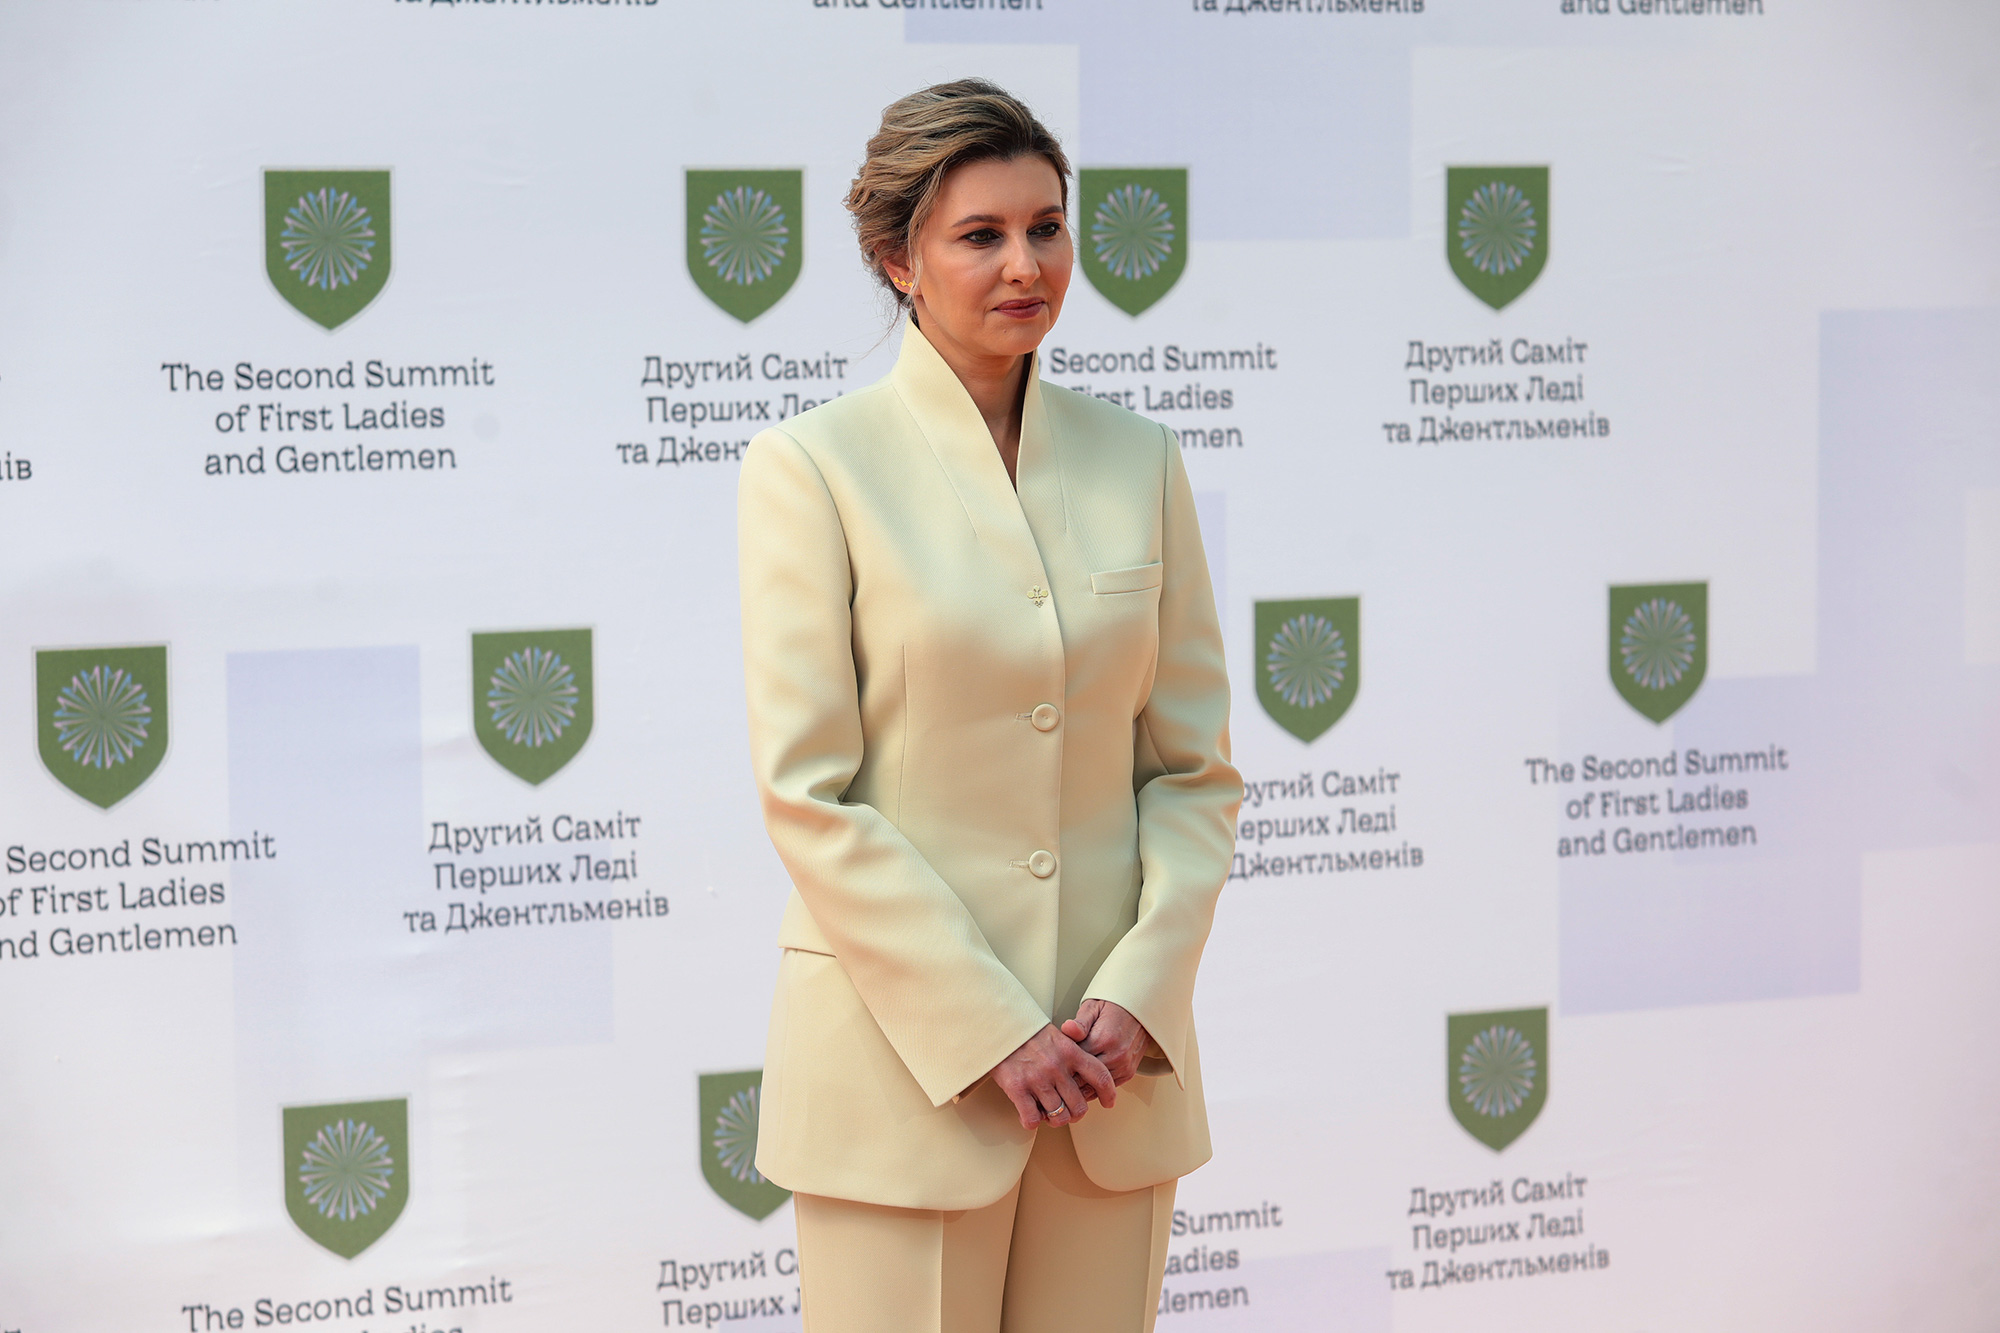 Ukrainian first lady Olena Zelenska attends the Second Summit of First Ladies and Gentlemen "Ukraine and the World: The Future We (Re)build Together", in Kyiv, Ukraine, on July 23, 2022.